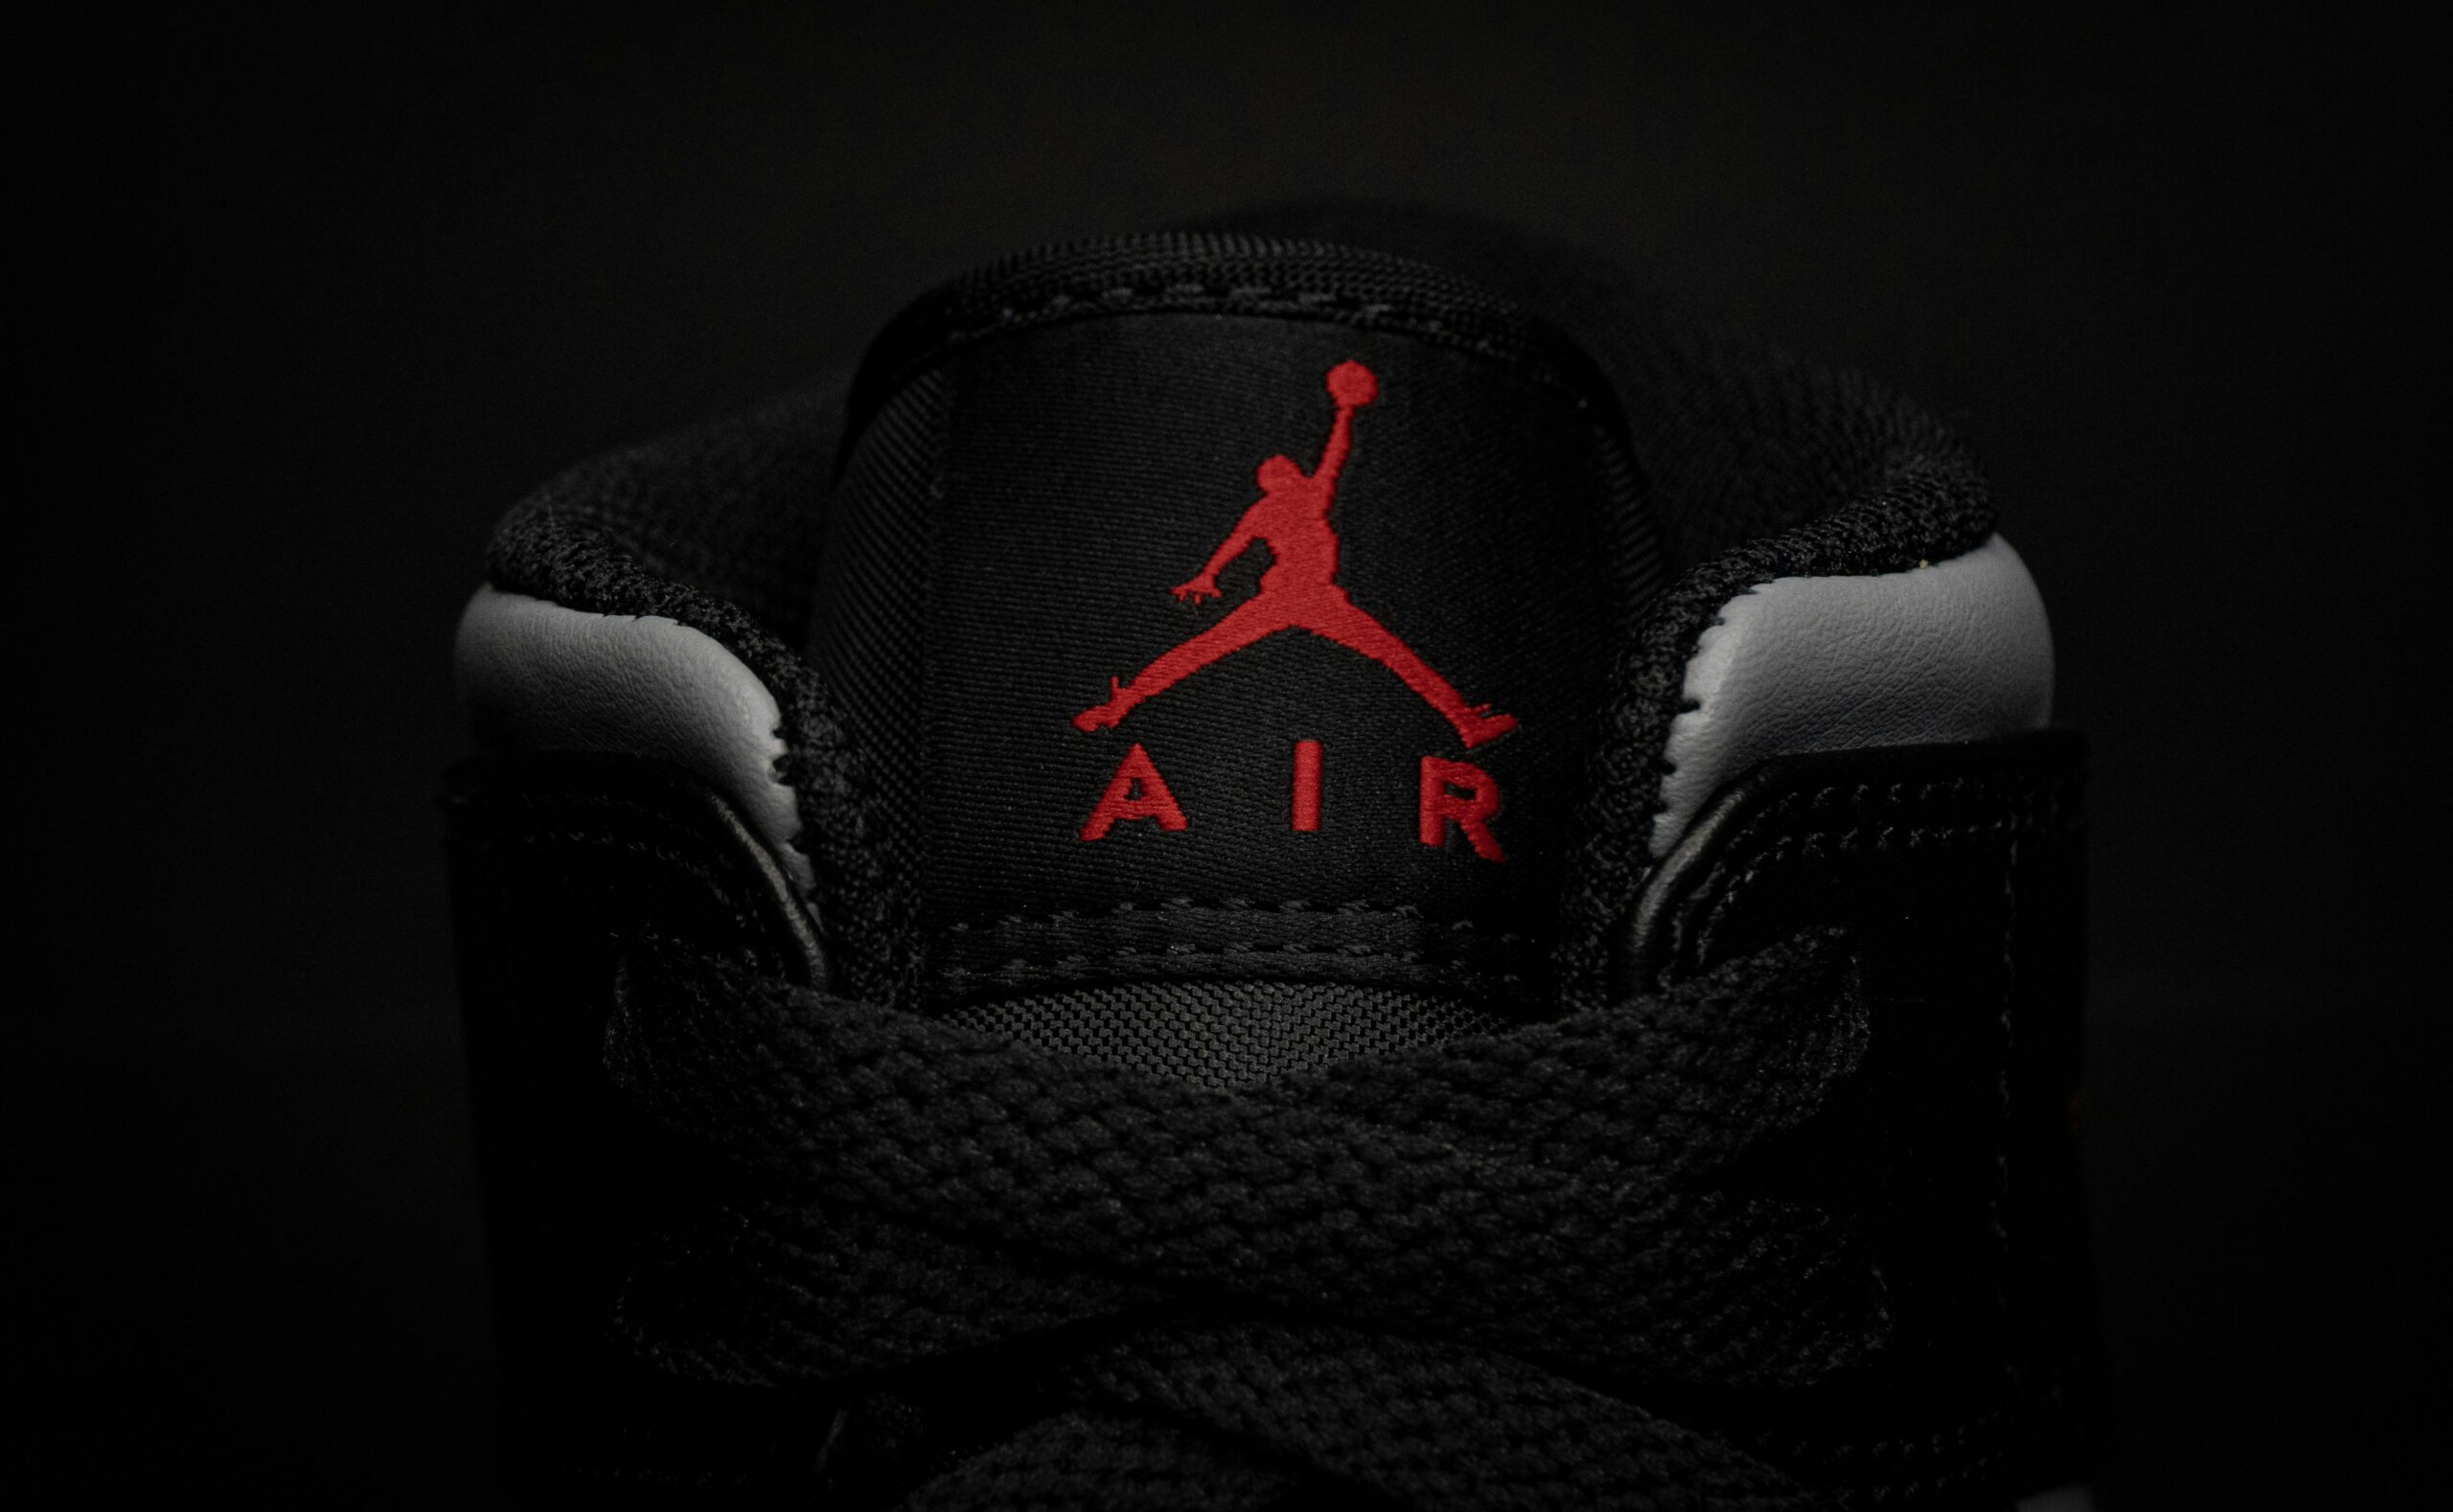 Air Jordan shoes remain highly collectable around the world